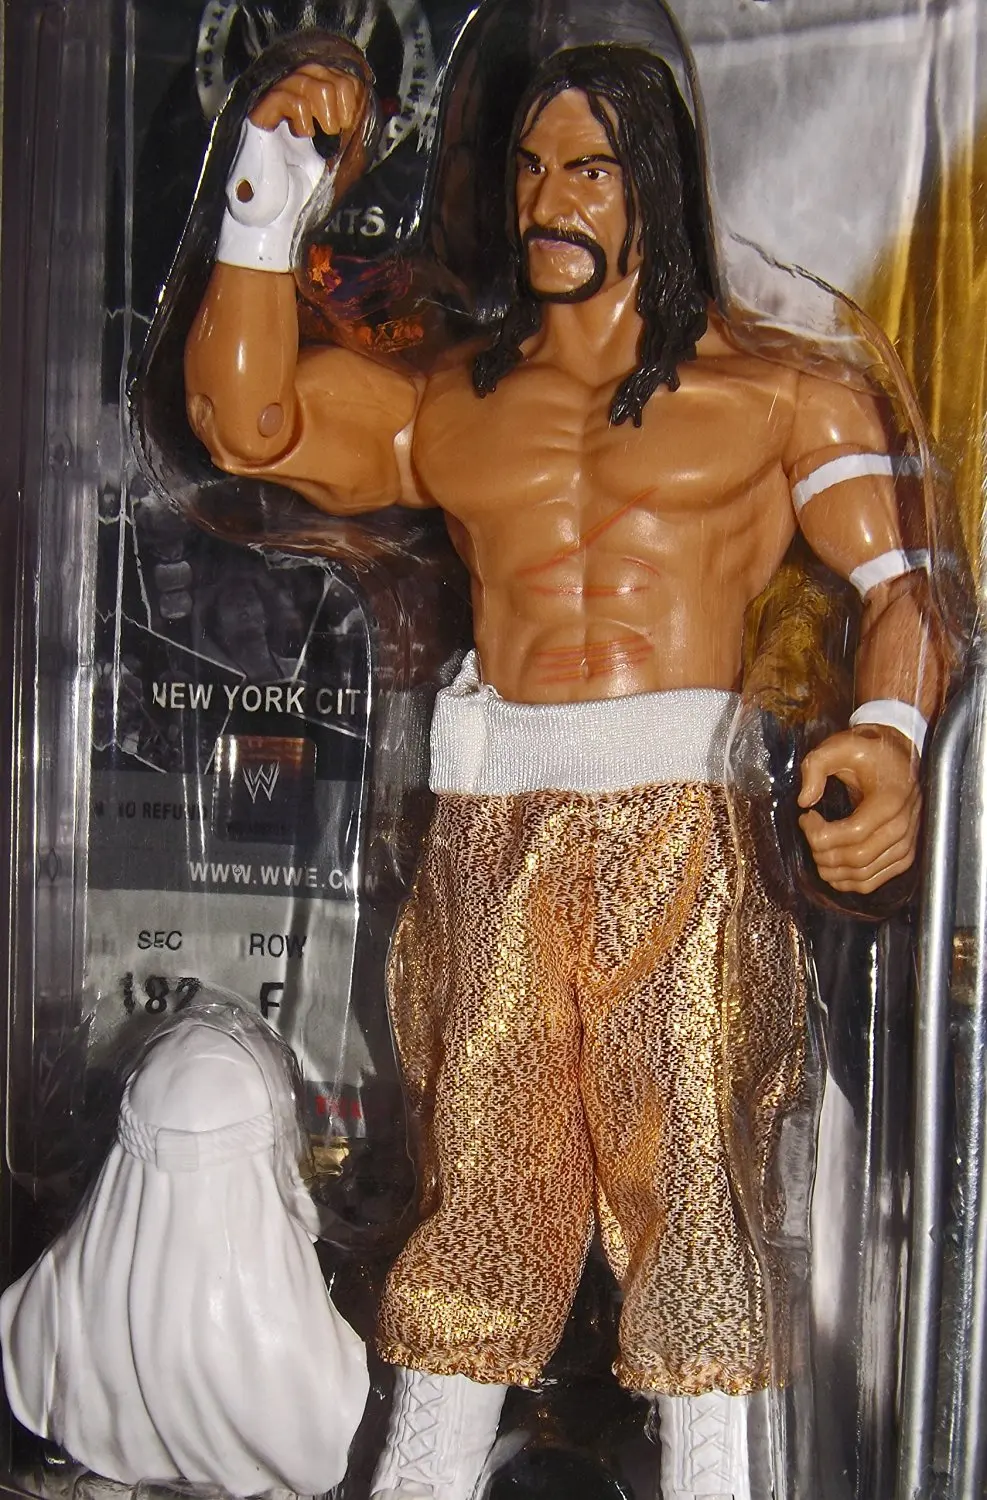 Sabu Figure Classic Super Stars Wrestlemania Ticket Promo Collectible - Collector Series #10 Mint WWE O Limited Edition